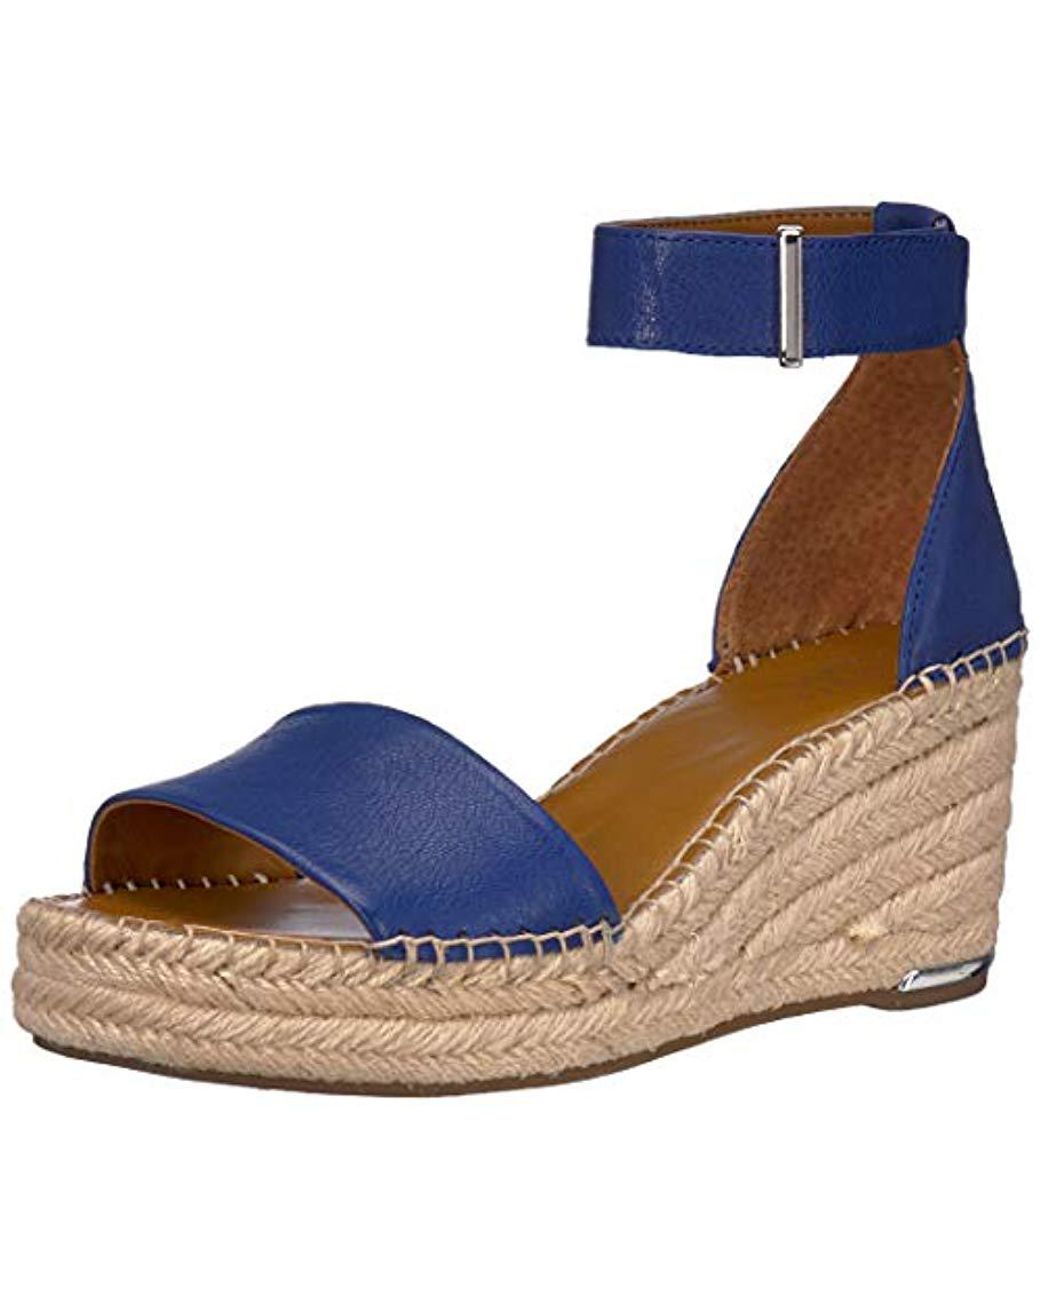 Franco Sarto Clemens Espadrille Wedge Sandal in Blue - Save 40% - Lyst